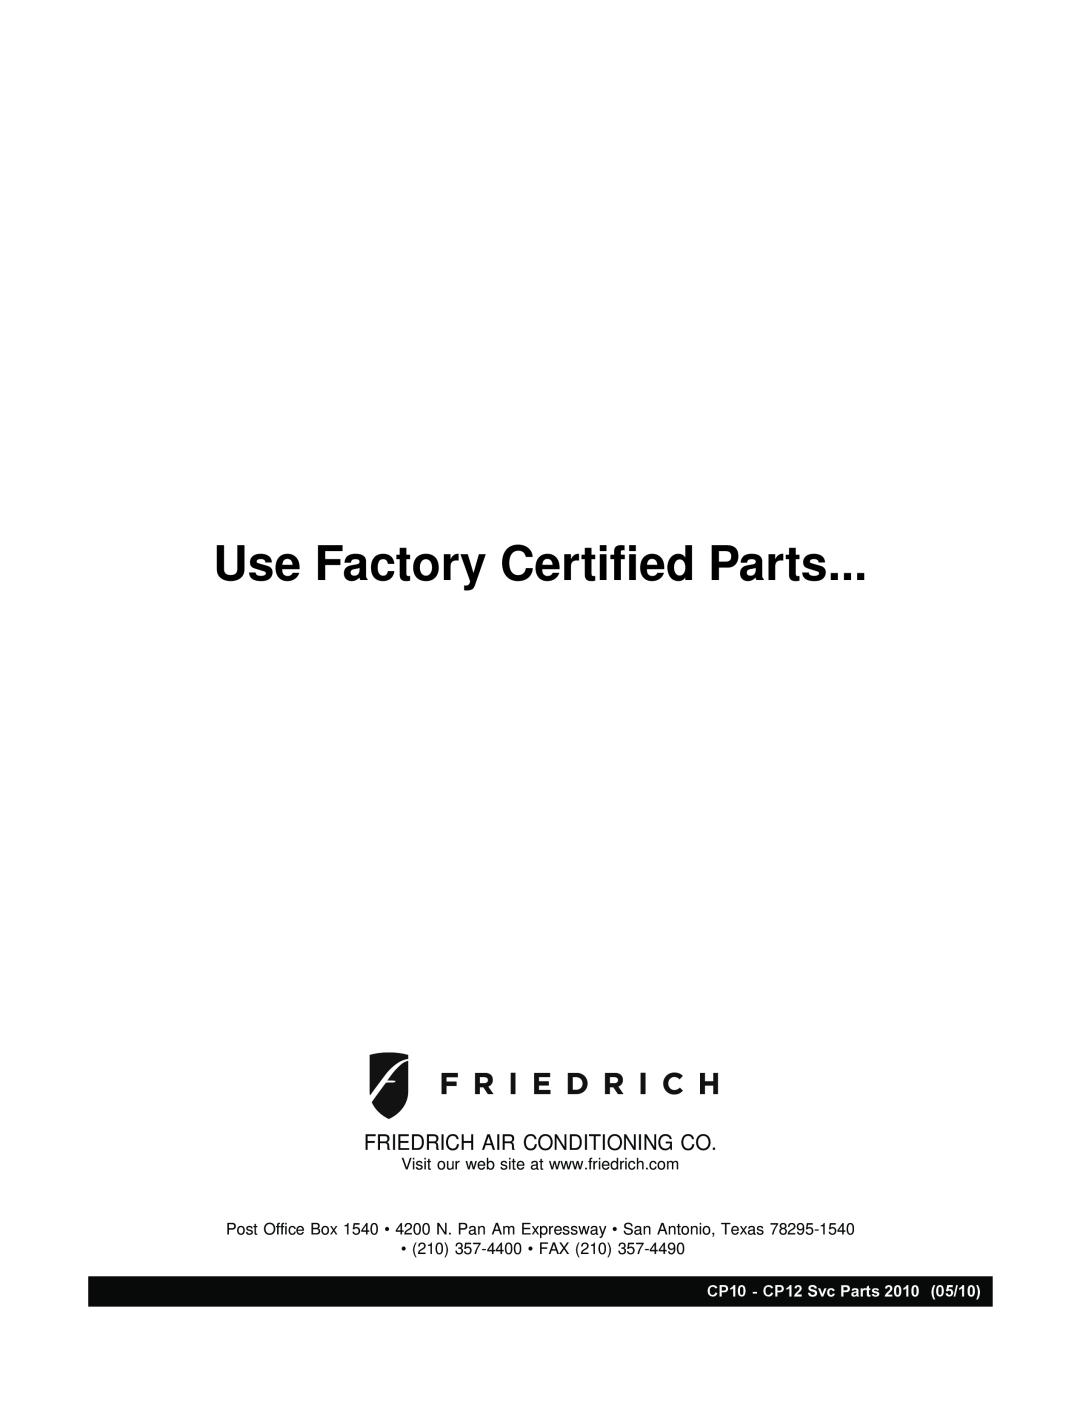 Friedrich CP12F10, CP10F10 manual Use Factory Certified Parts, Friedrich Air Conditioning Co, 210 357-4400 FAX 